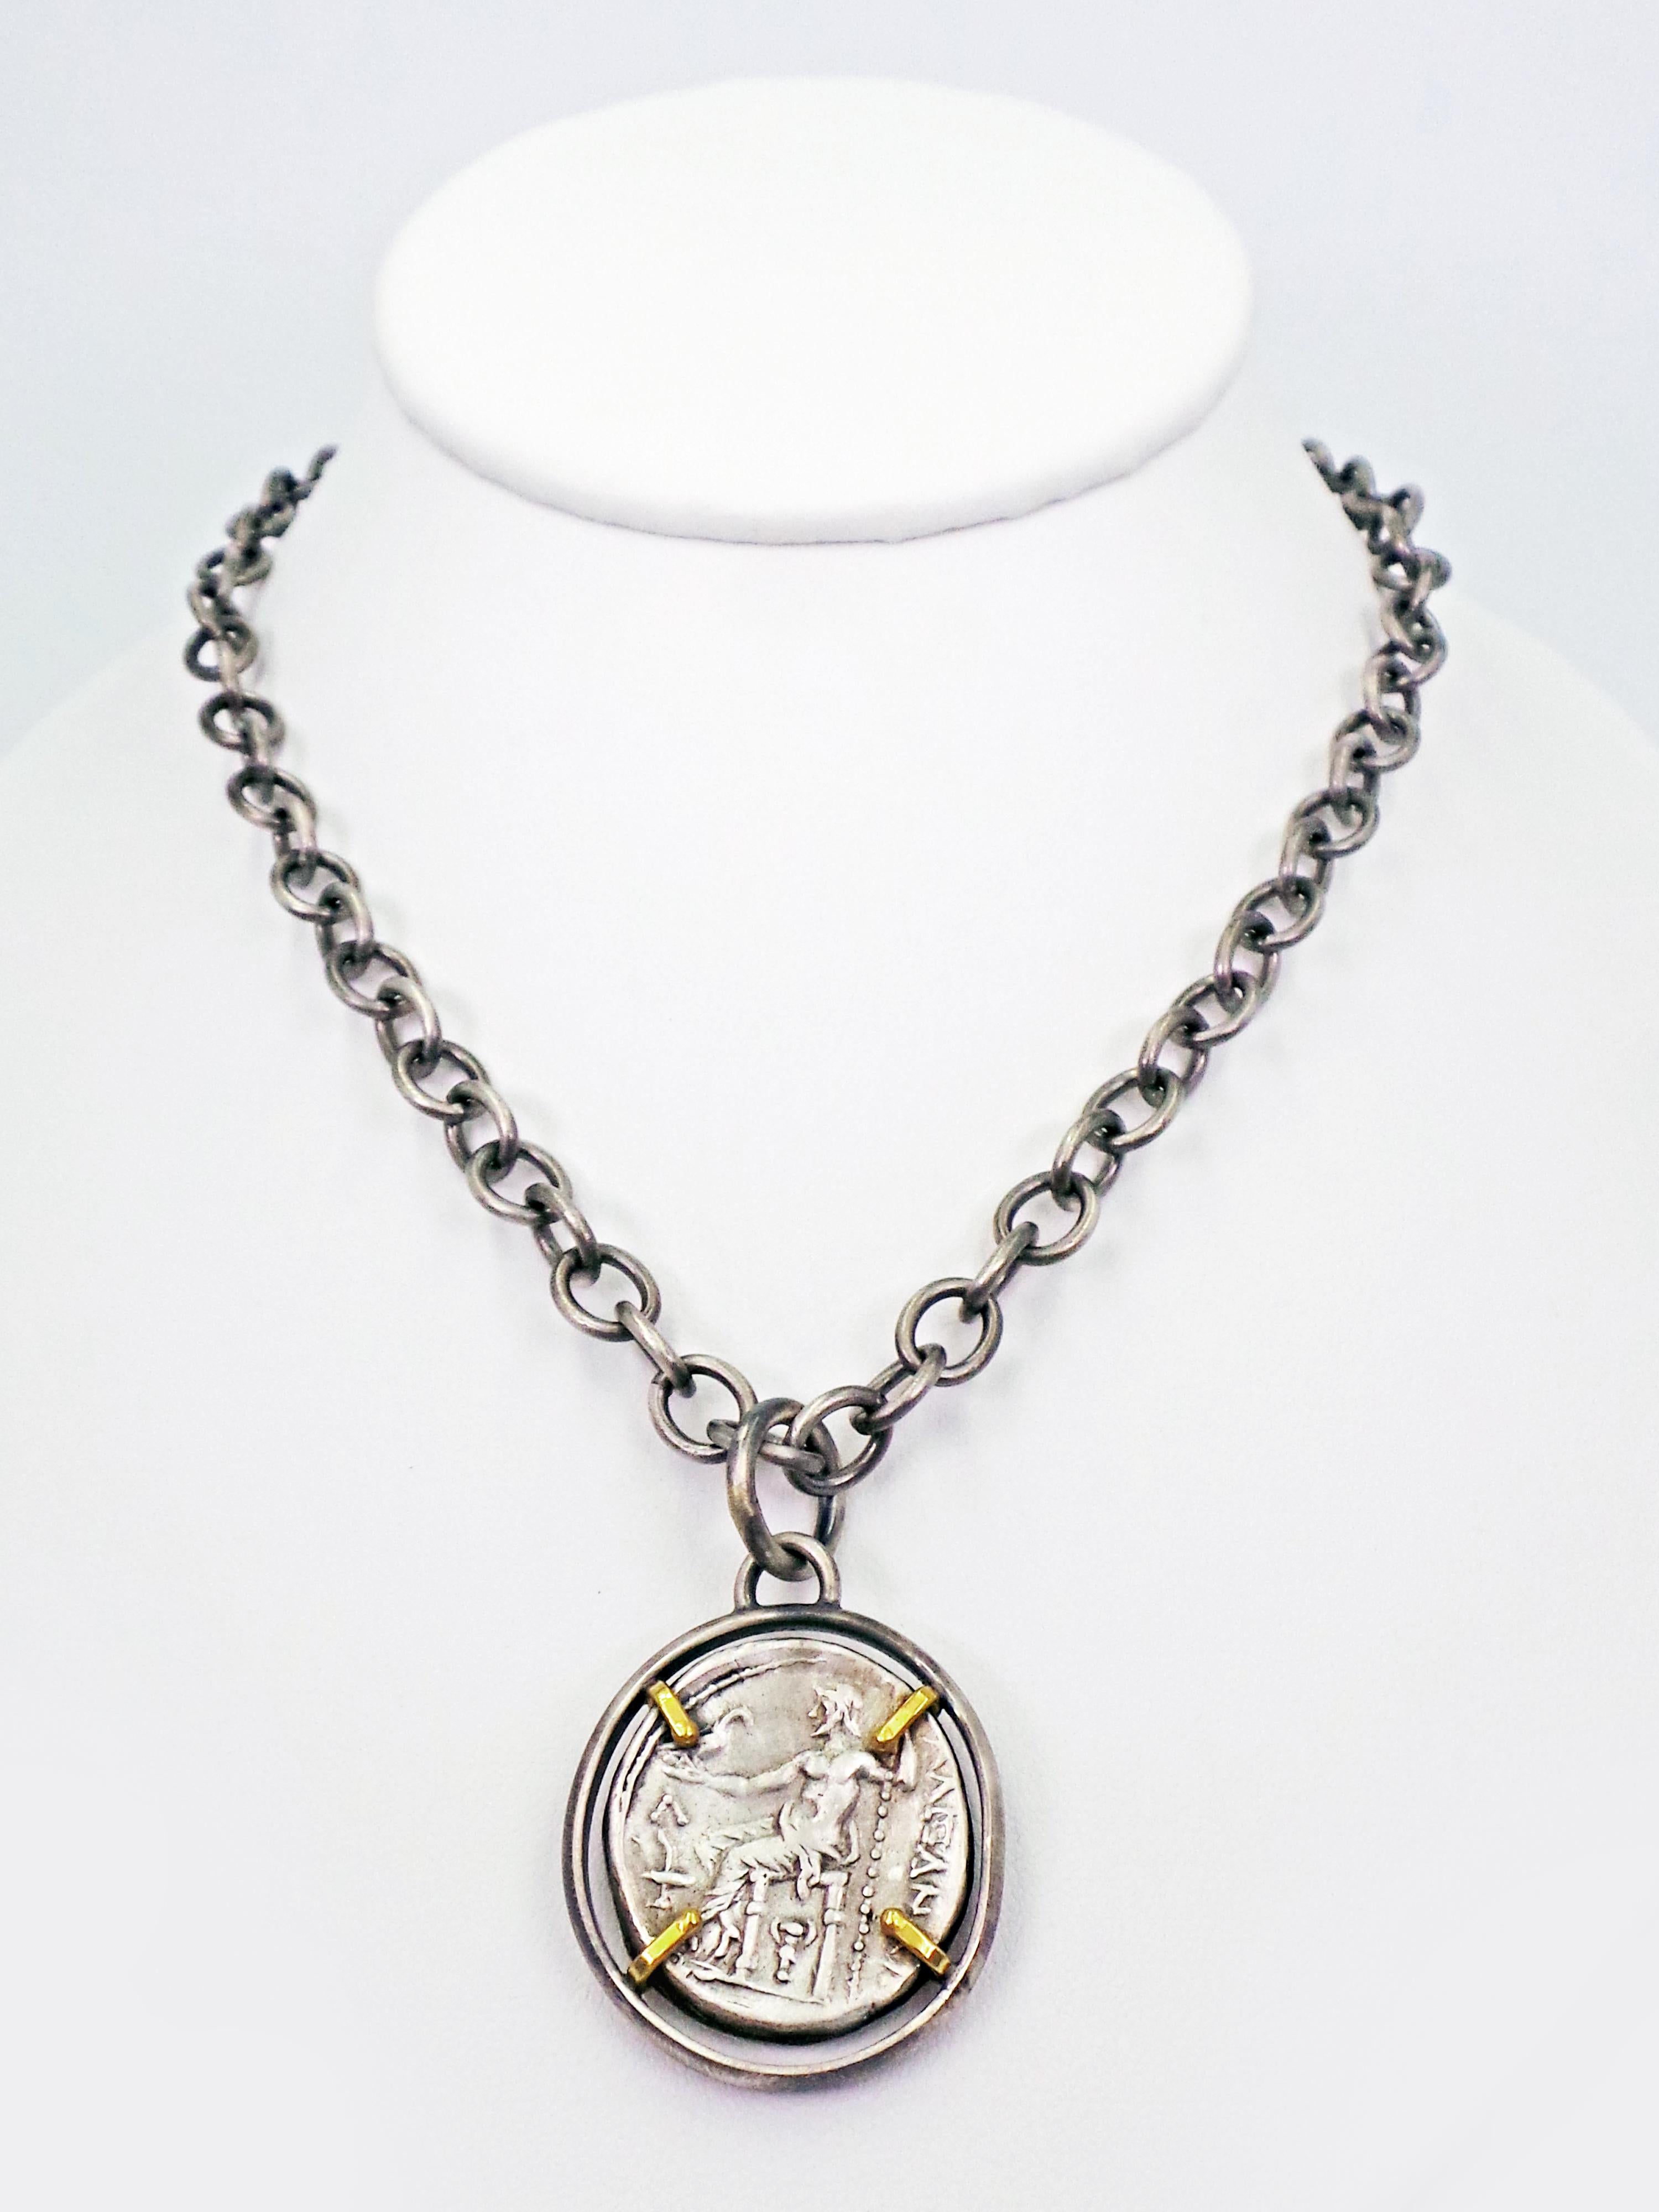 Contemporary Ancient Greek Tetradrachm Silver Coin Reversible Pendant on Chain Necklace For Sale